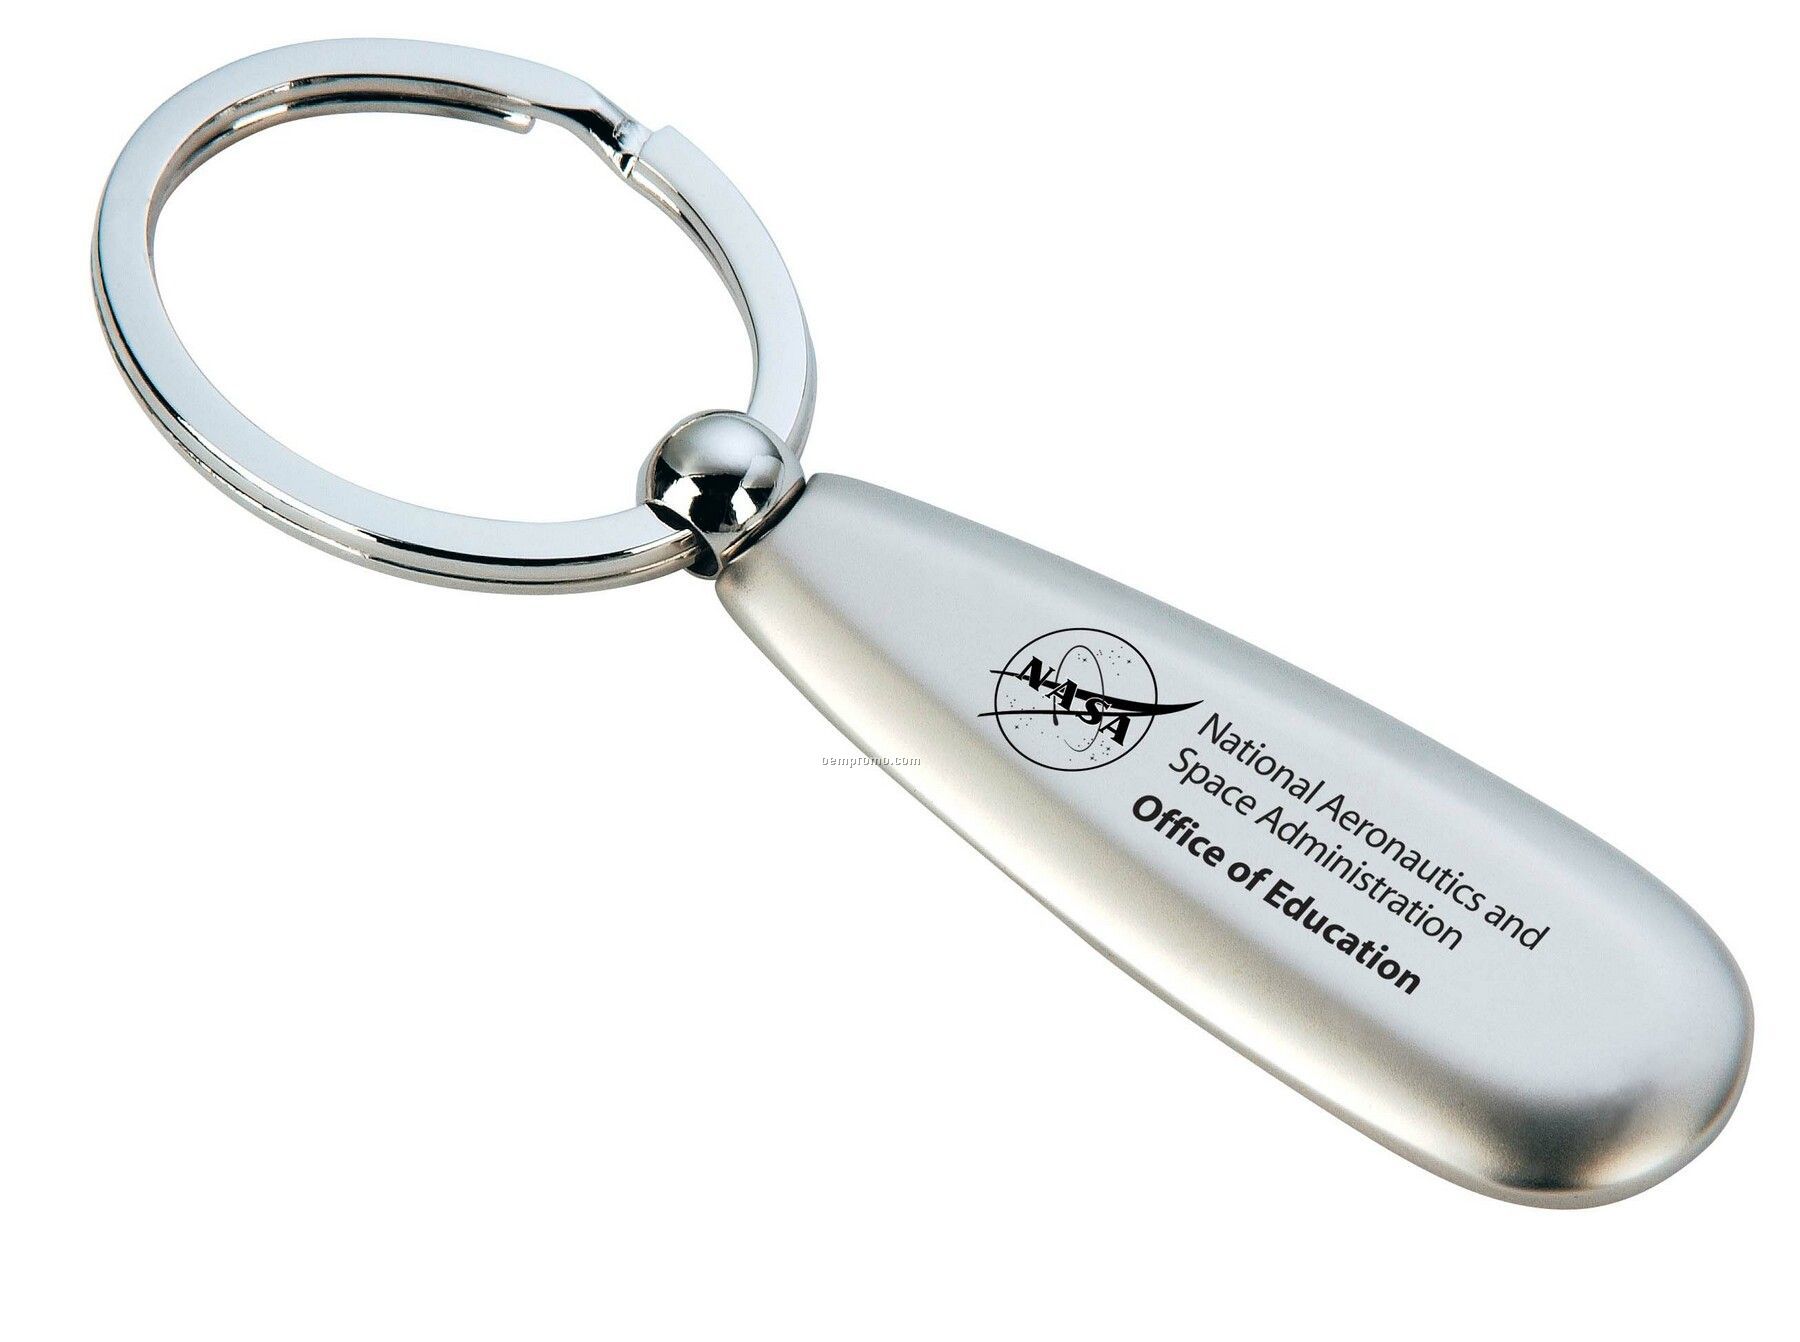 Matte Nickel Finish Rounded Rectangle Key Ring (Dark Etched)